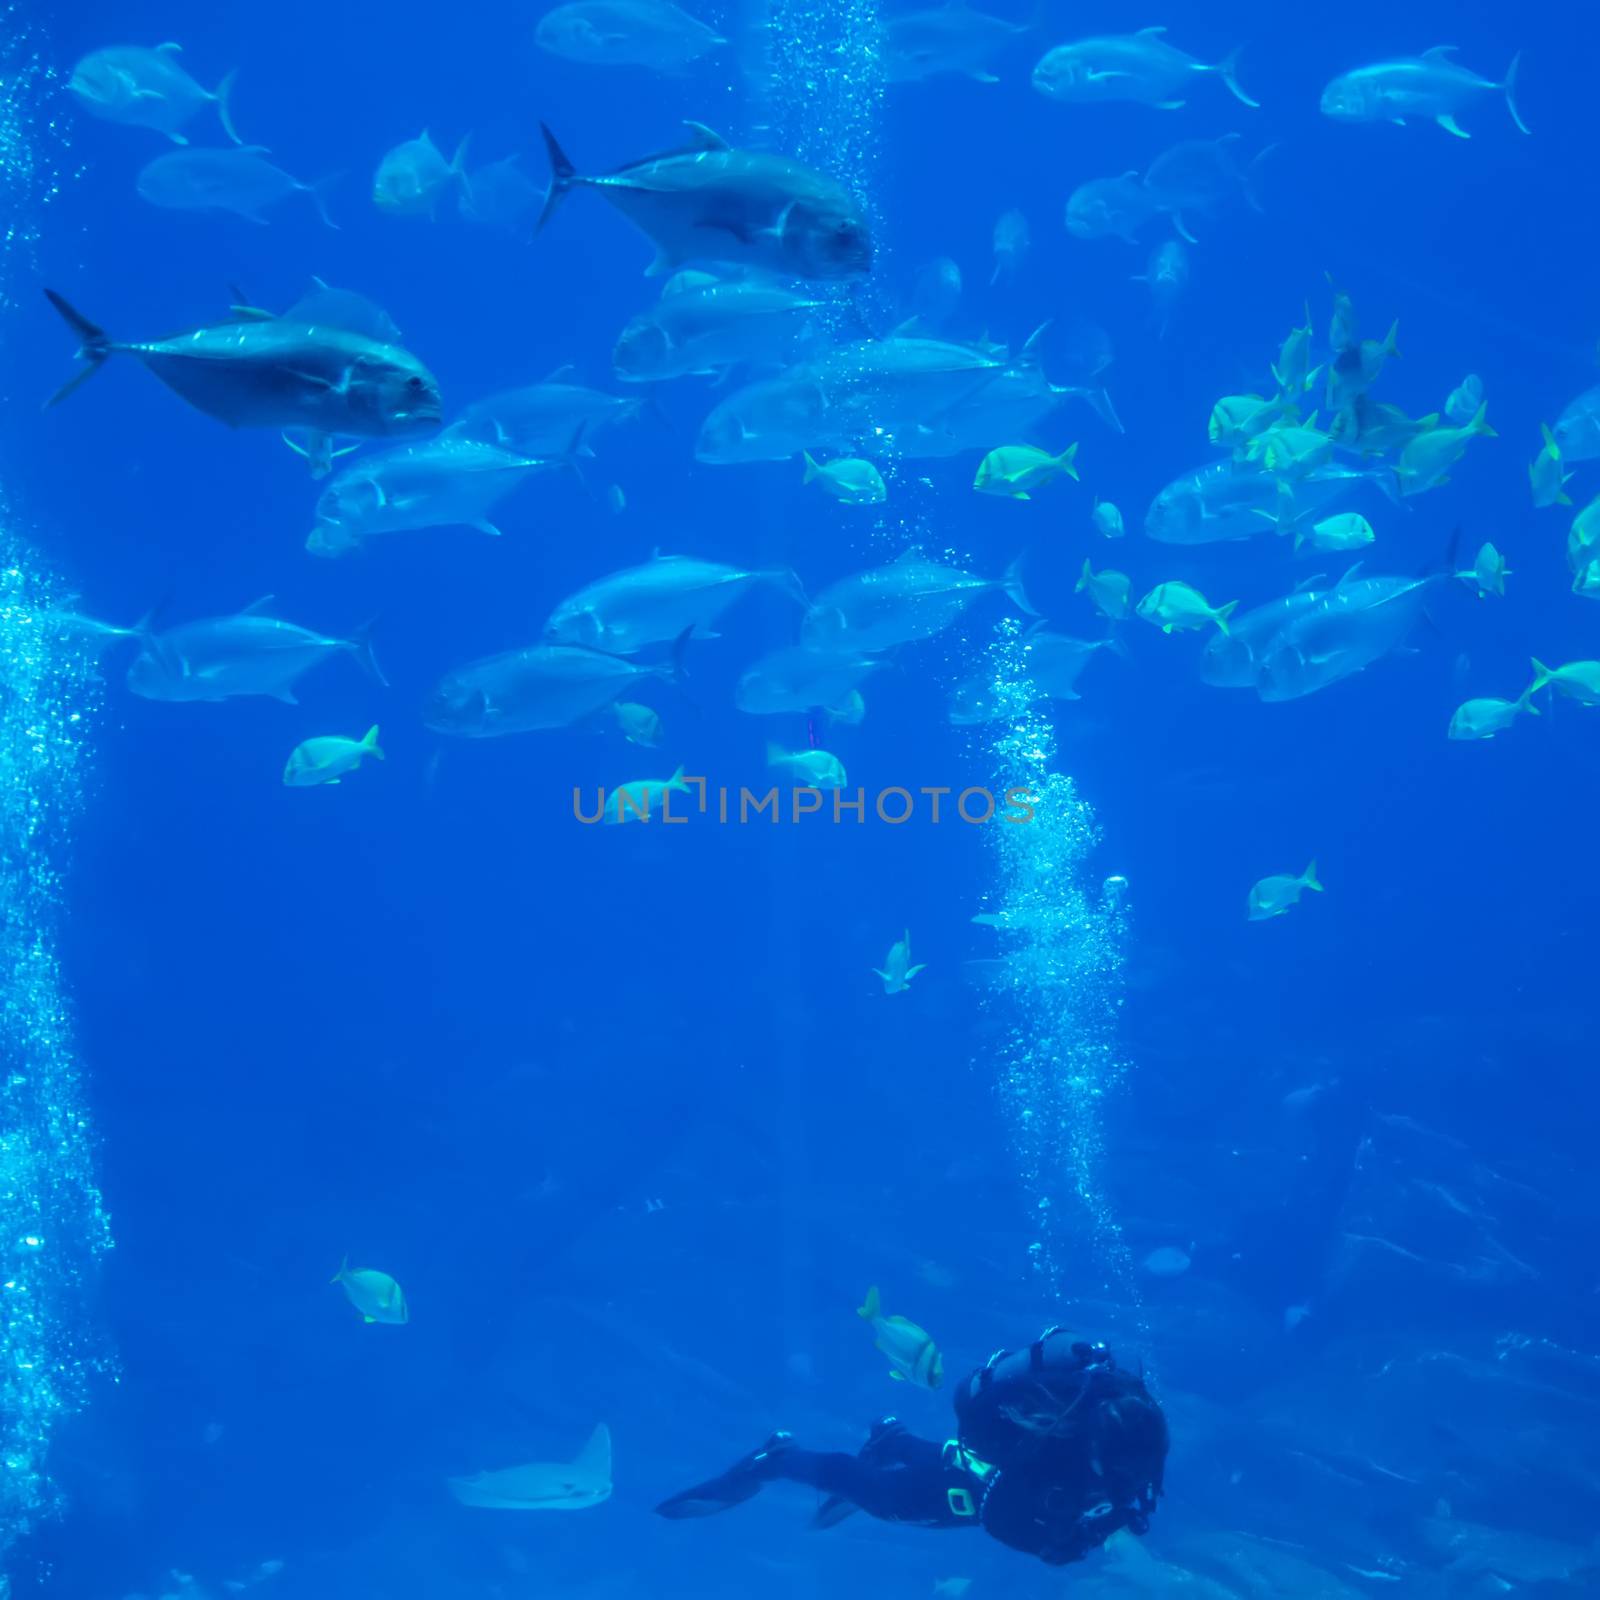 scuba diver with fish exploring in ocean by digidreamgrafix